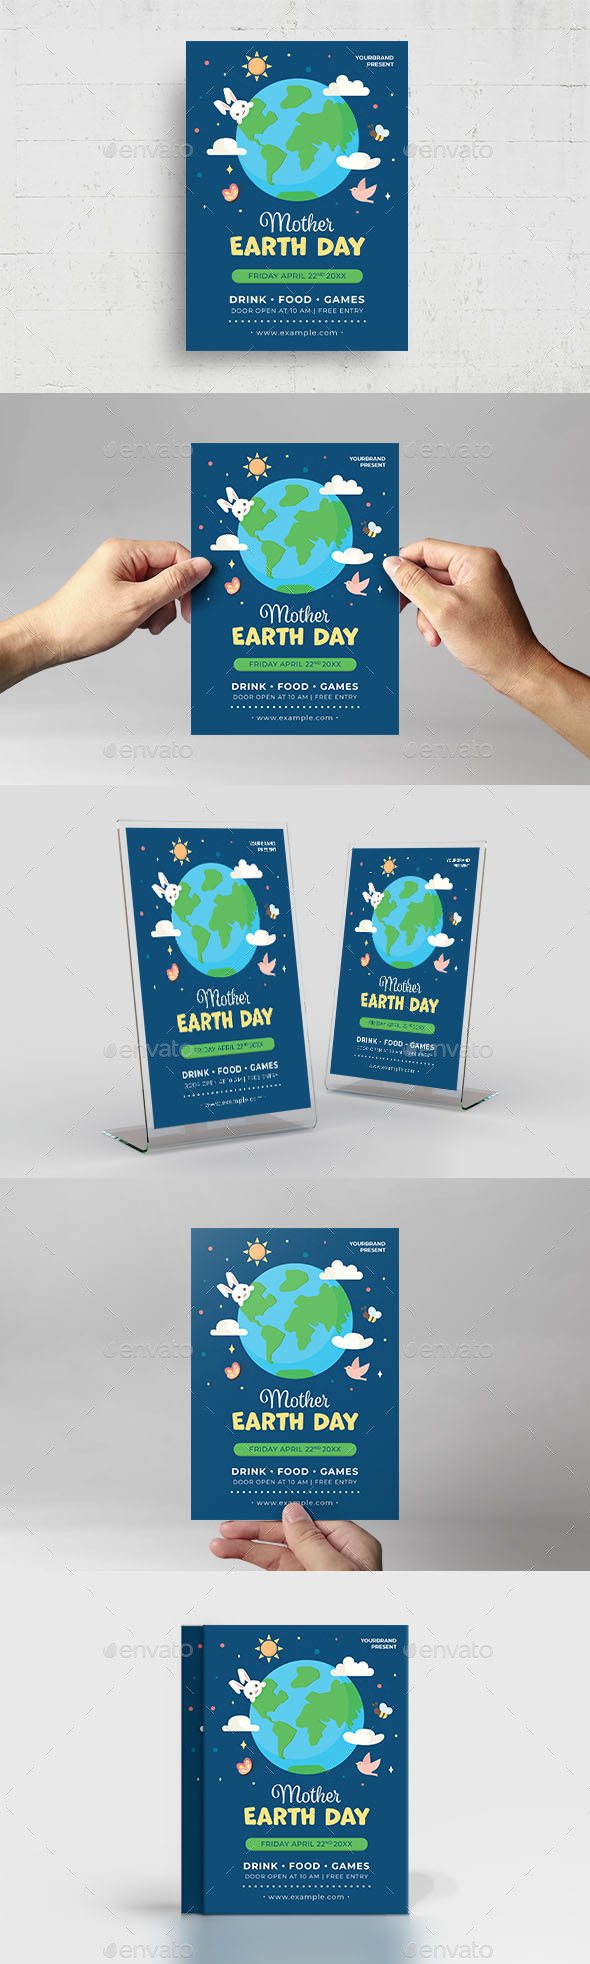 Cute Earth Day Flyer Template